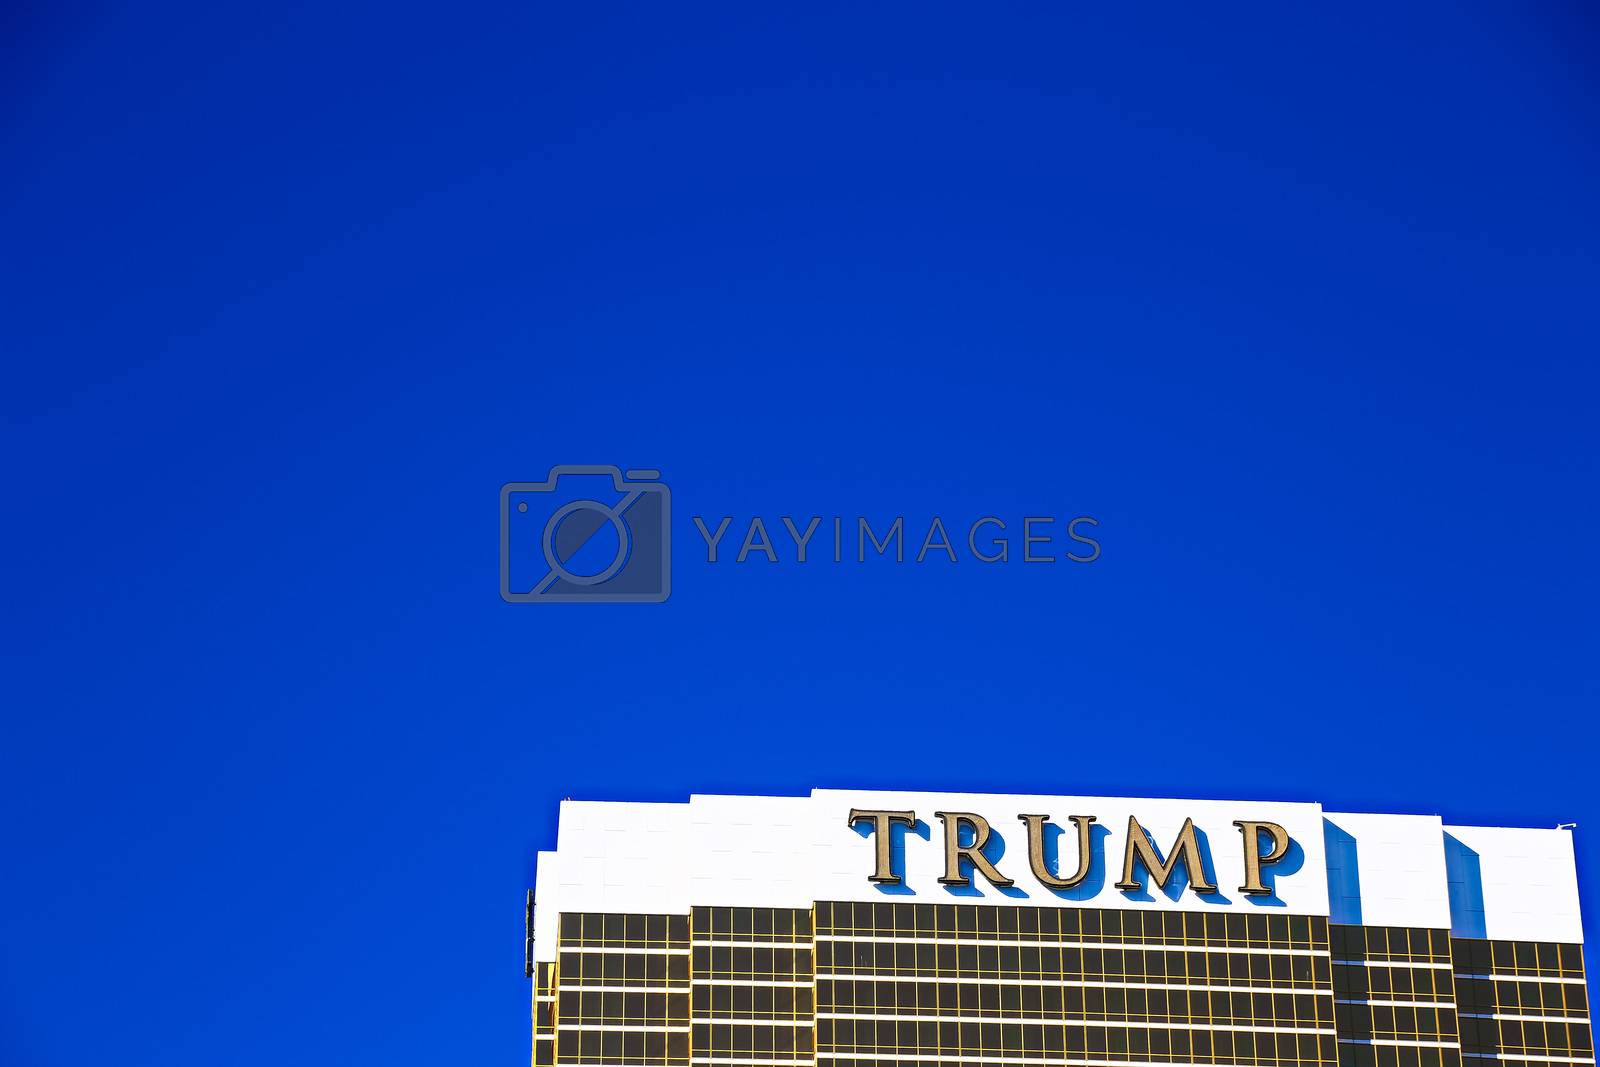 Royalty free image of Las Vegas, USA - Sep 17, 2018: Trump International Hotel in Las Vegas, NV, named for real estate developer and politician Donald Trump. The luxury property's windows are gilded with 24-carat gold. by USA-TARO